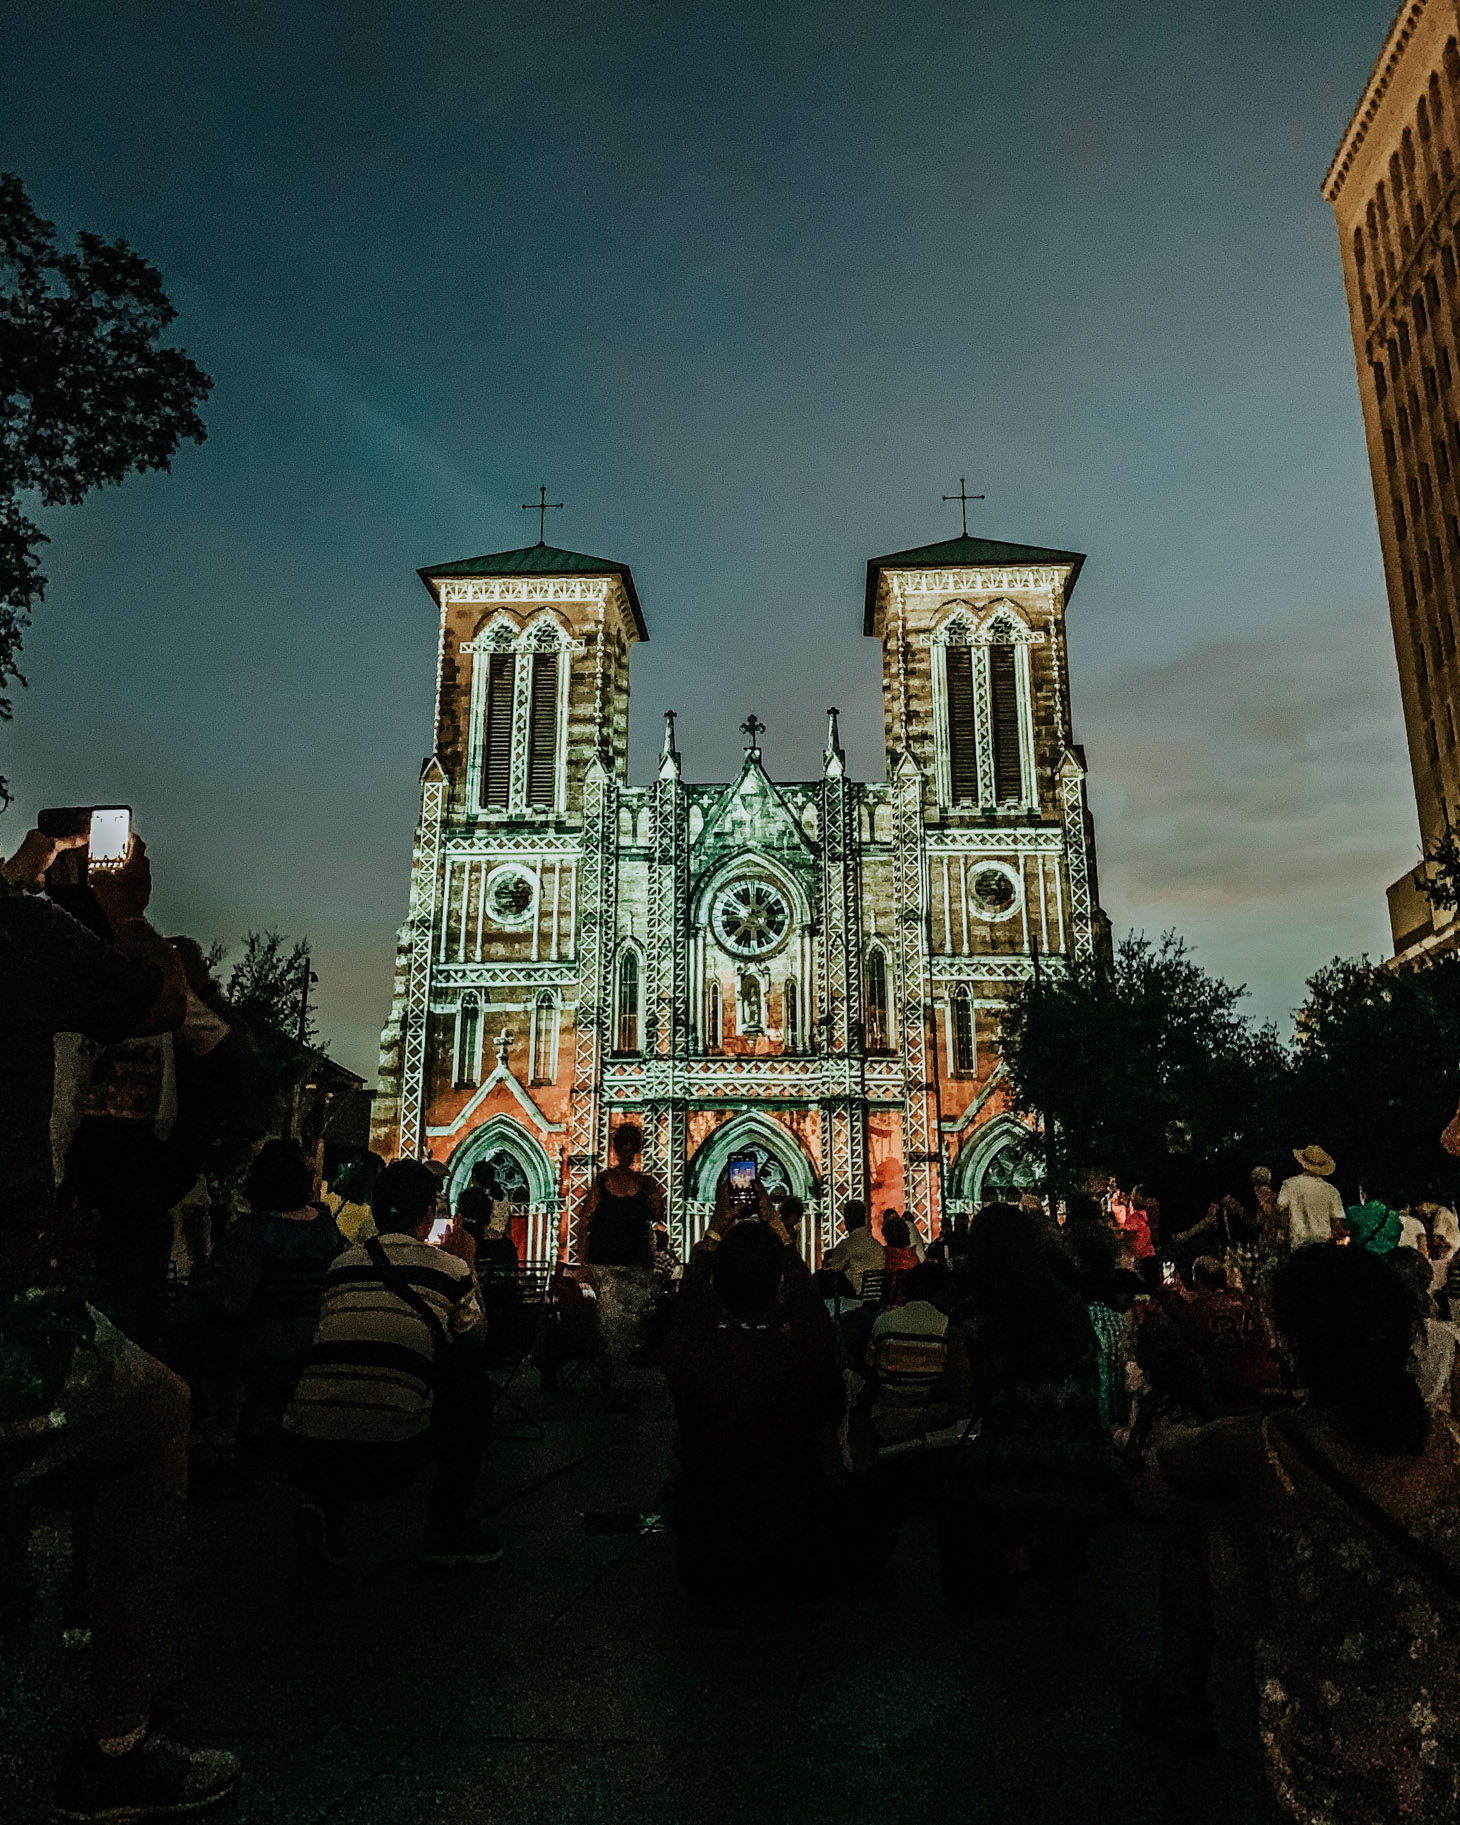 Top 10 Kid Friendly Activities in San Antonio by popular Texas travel blog, Lone Star Looking Glass: image of the Saga light show at the San Fernando Cathedral.